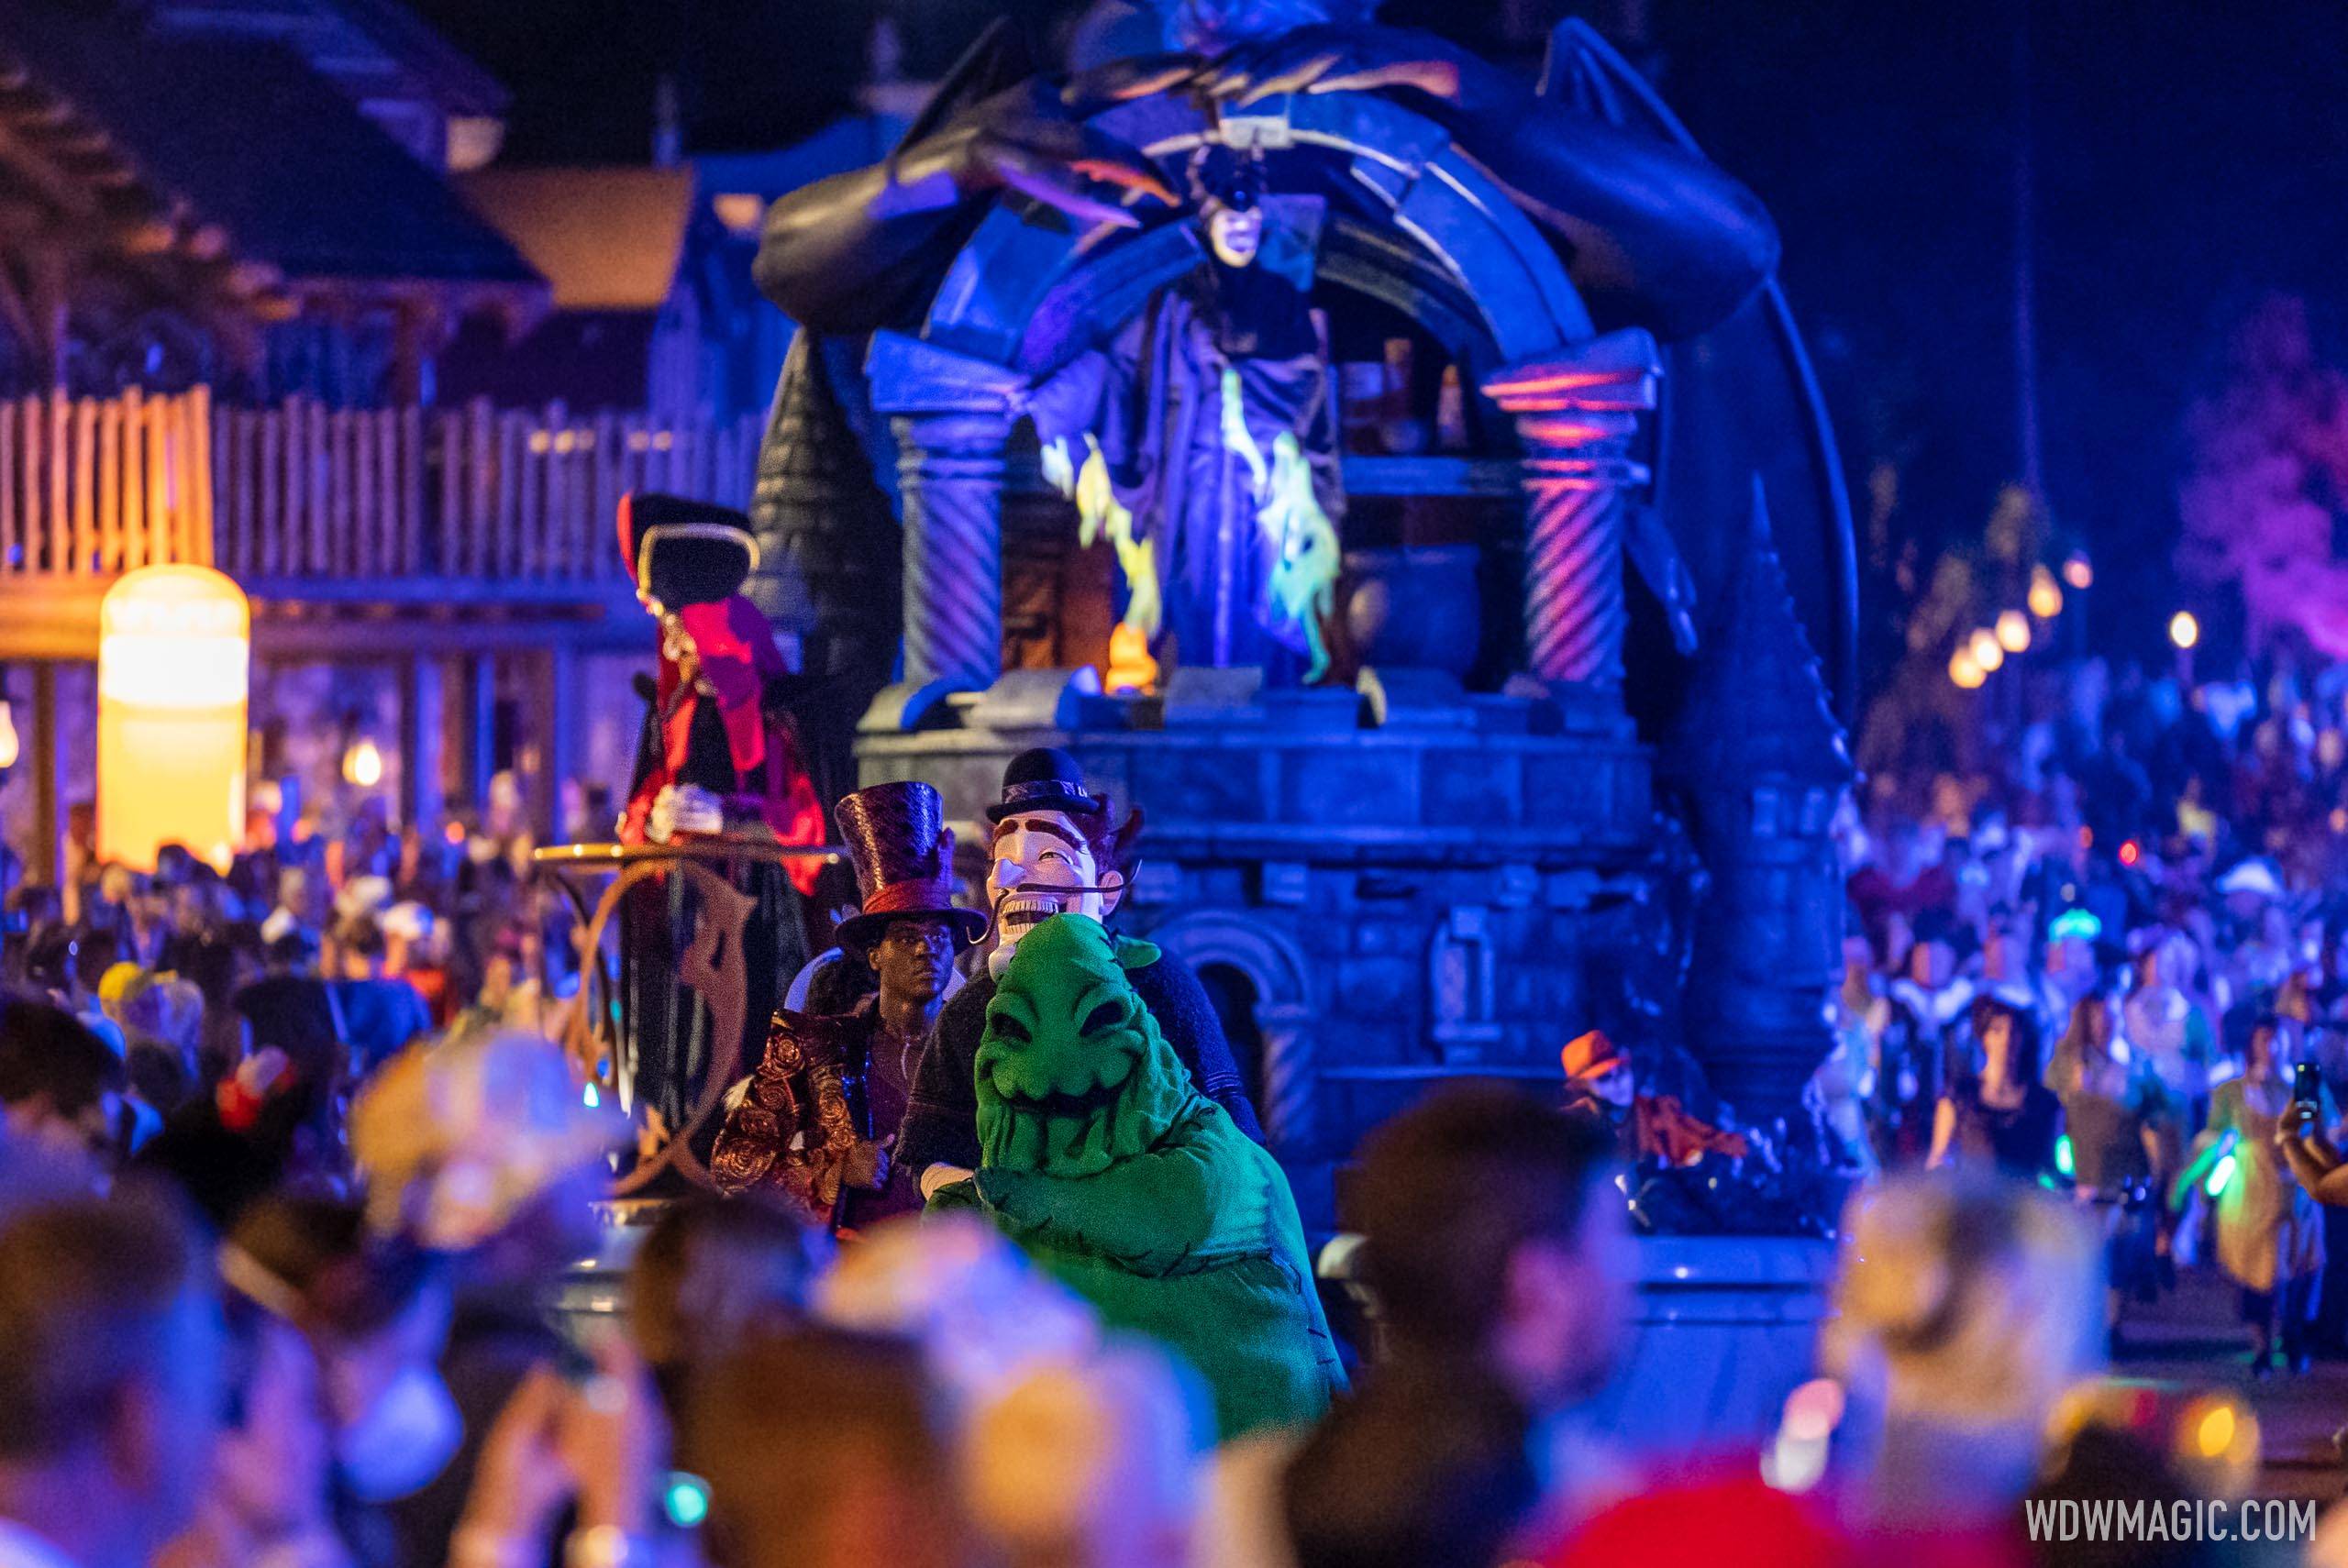 HAPPY HALLOWEEN! - Mickey’s Boo-to-You Halloween Parade video now available